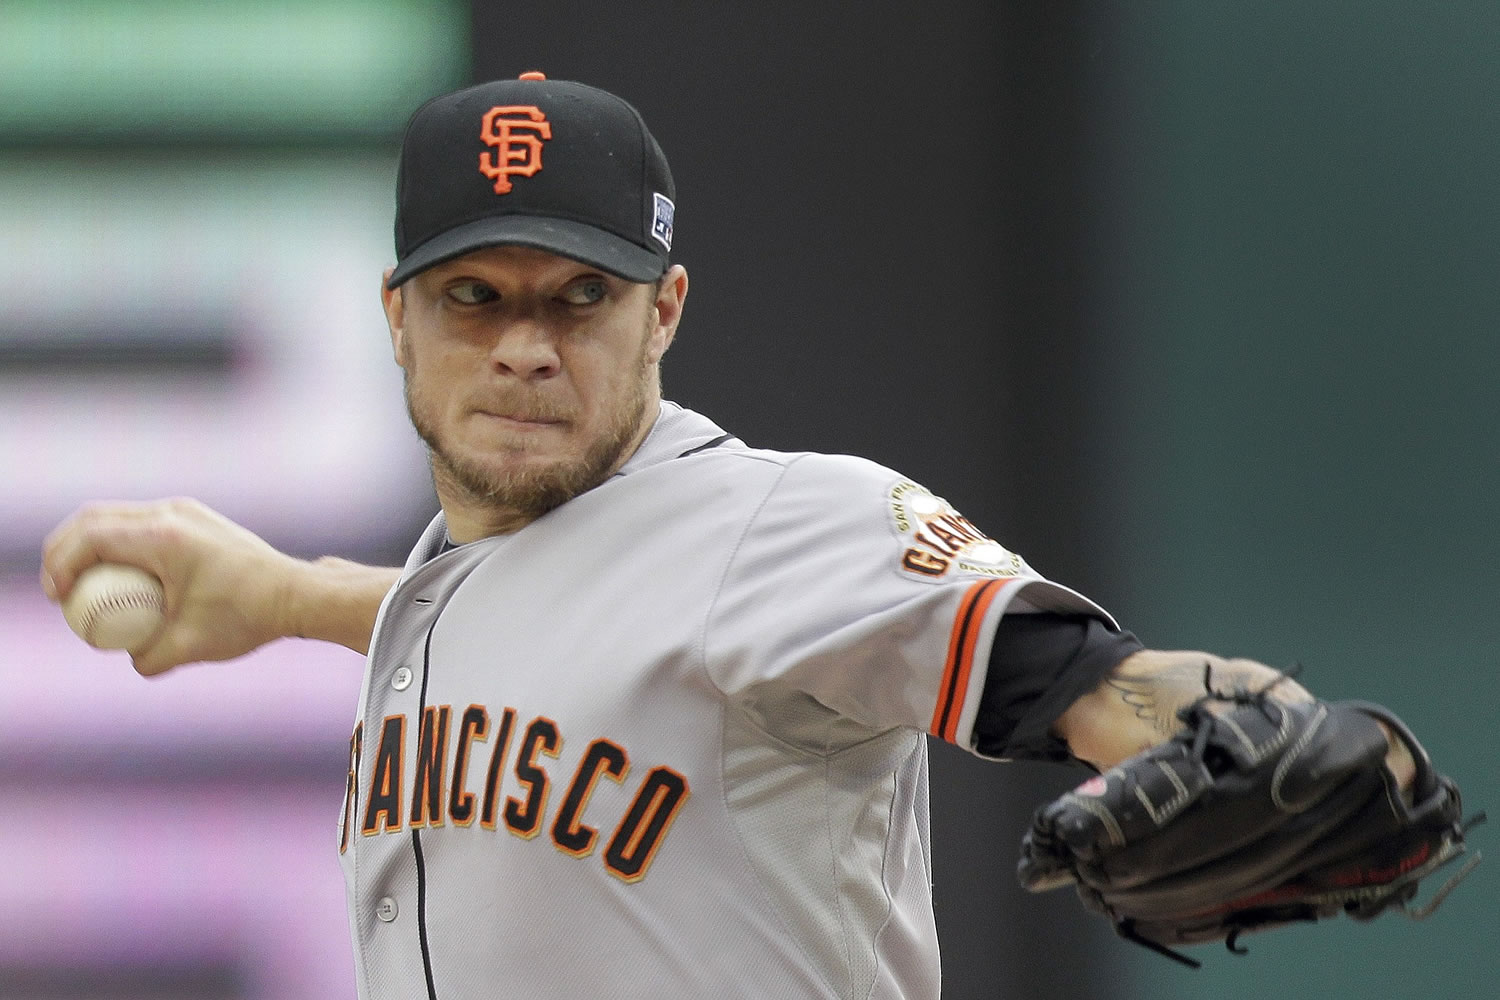 San Francisco Giants starting pitcher Jake Peavy (22) throws in the second inning of Game 1 of the NL Division Series against the Washington Nationals, Friday, Oct. 3, 2014, in Washington.